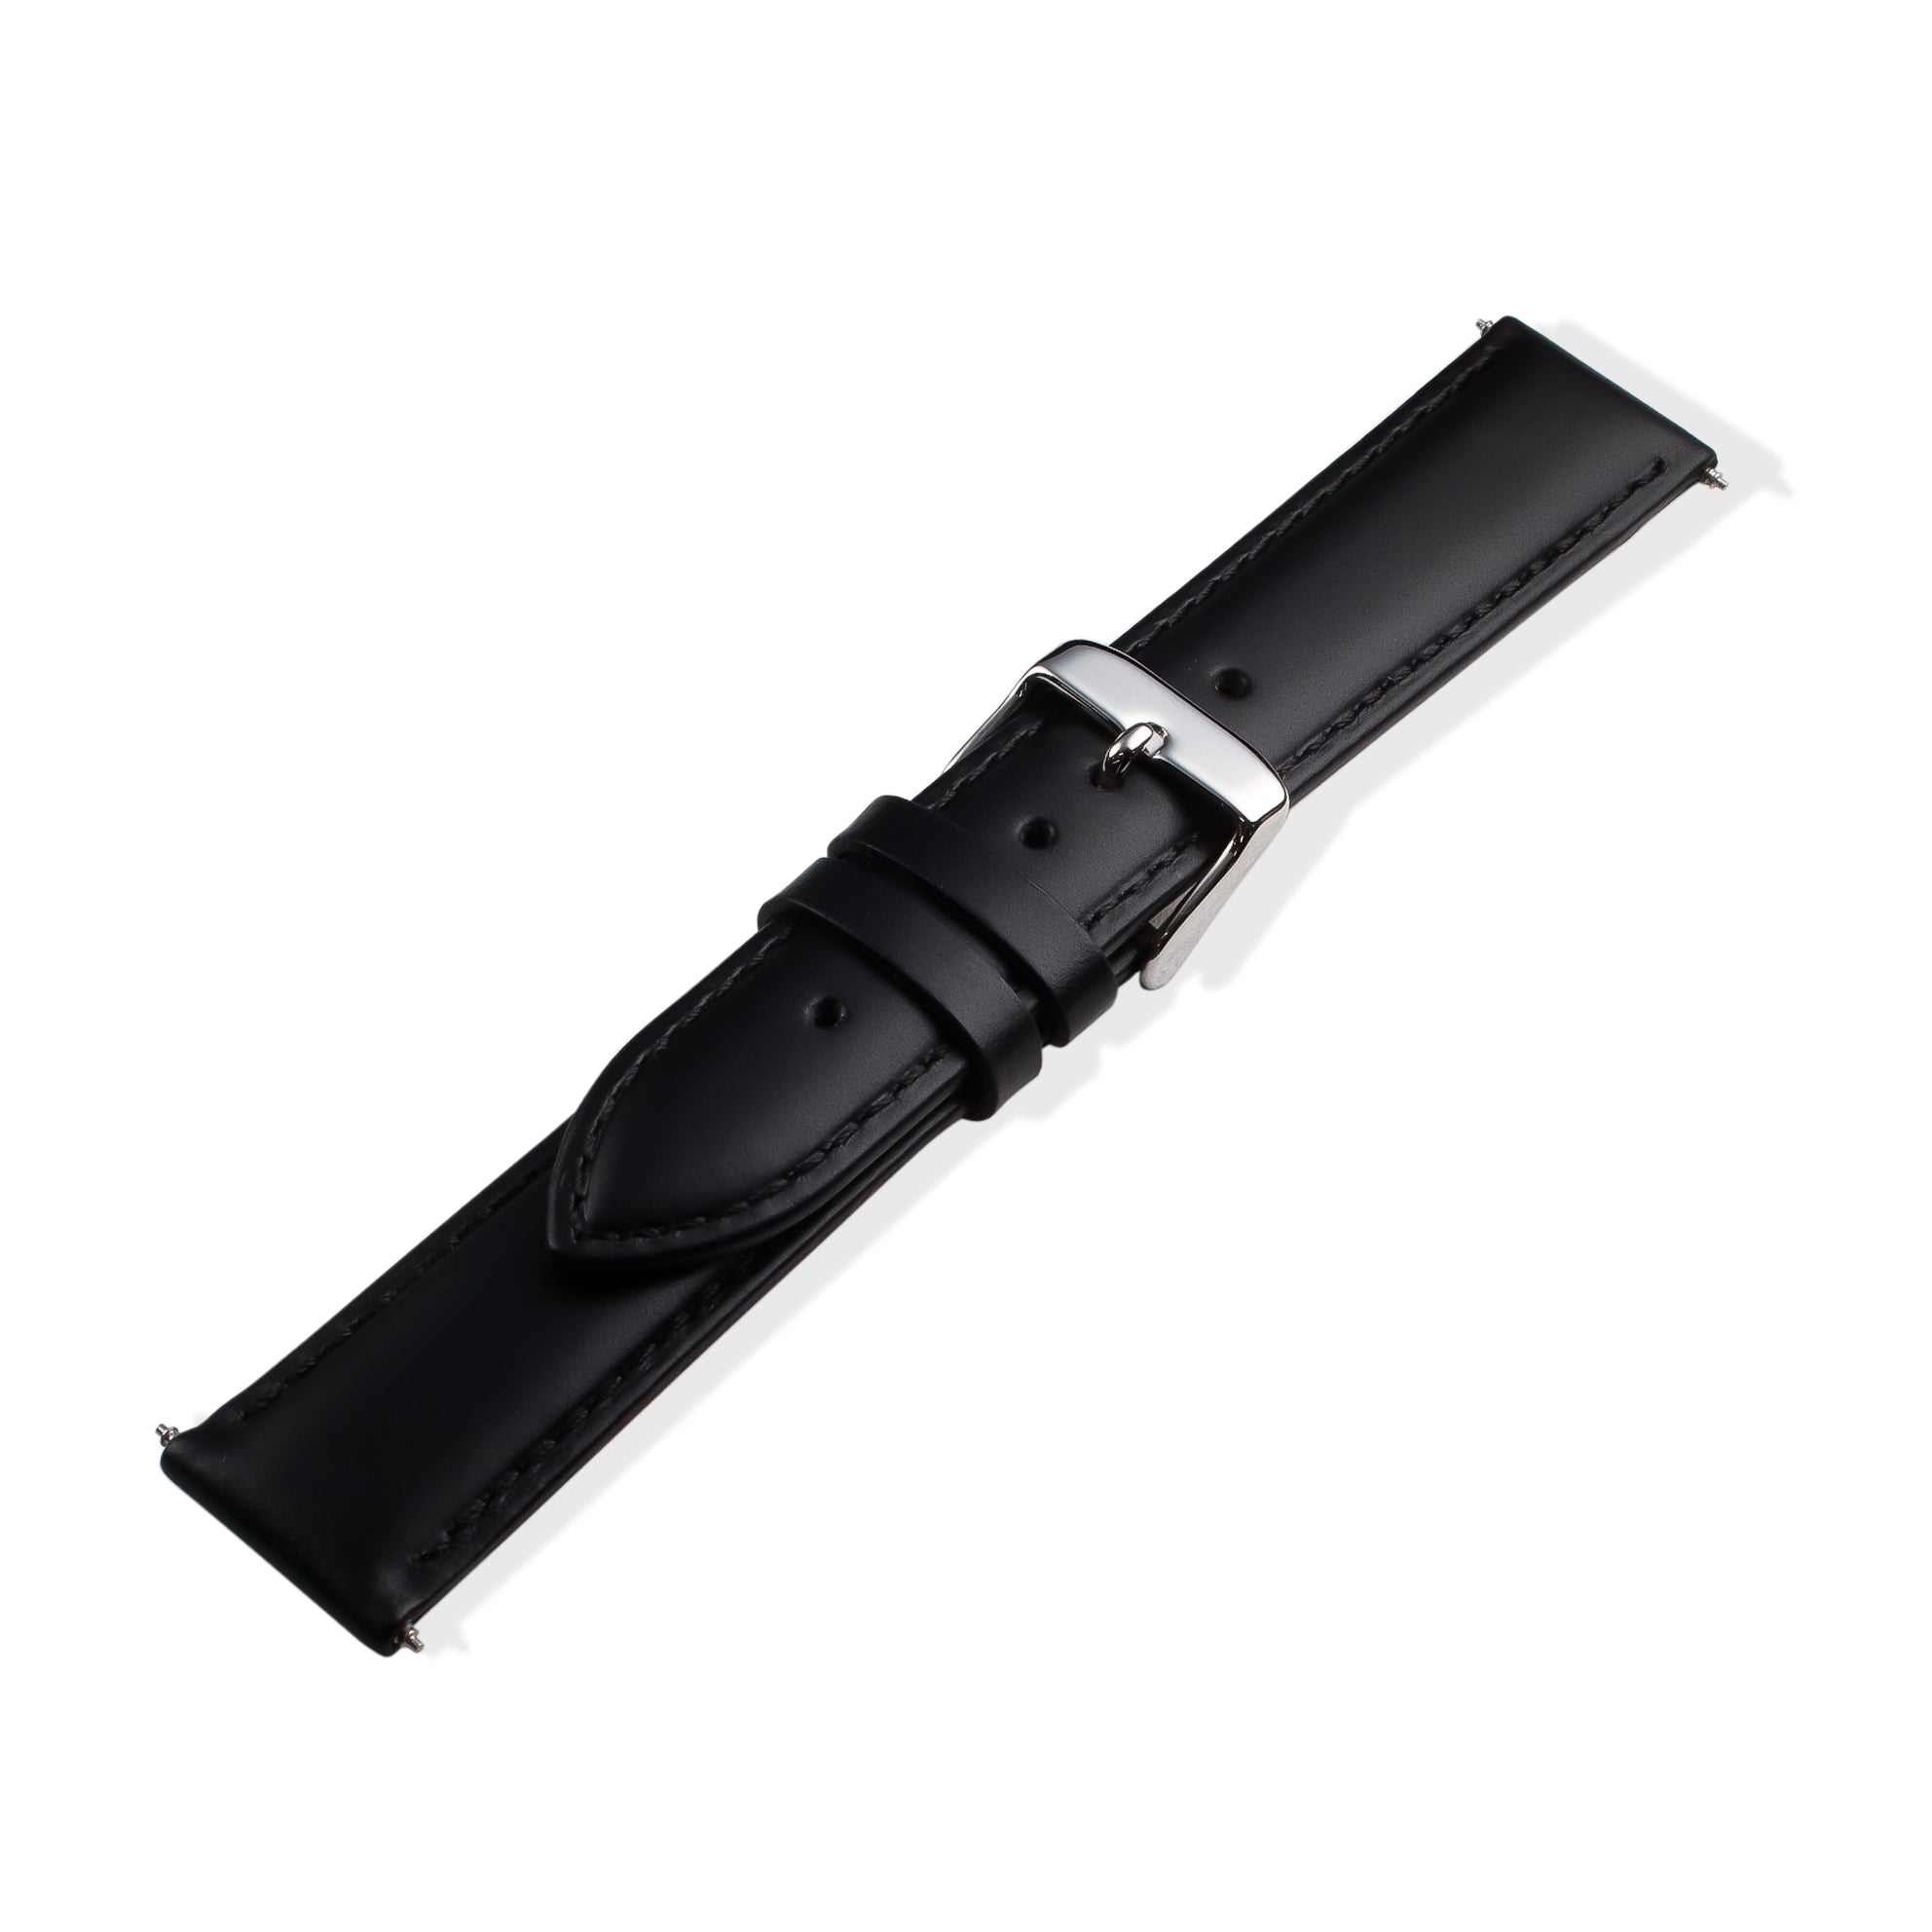 Wancher Watch: Calf Skin Leather Strap II Product Page - Wancher Watch